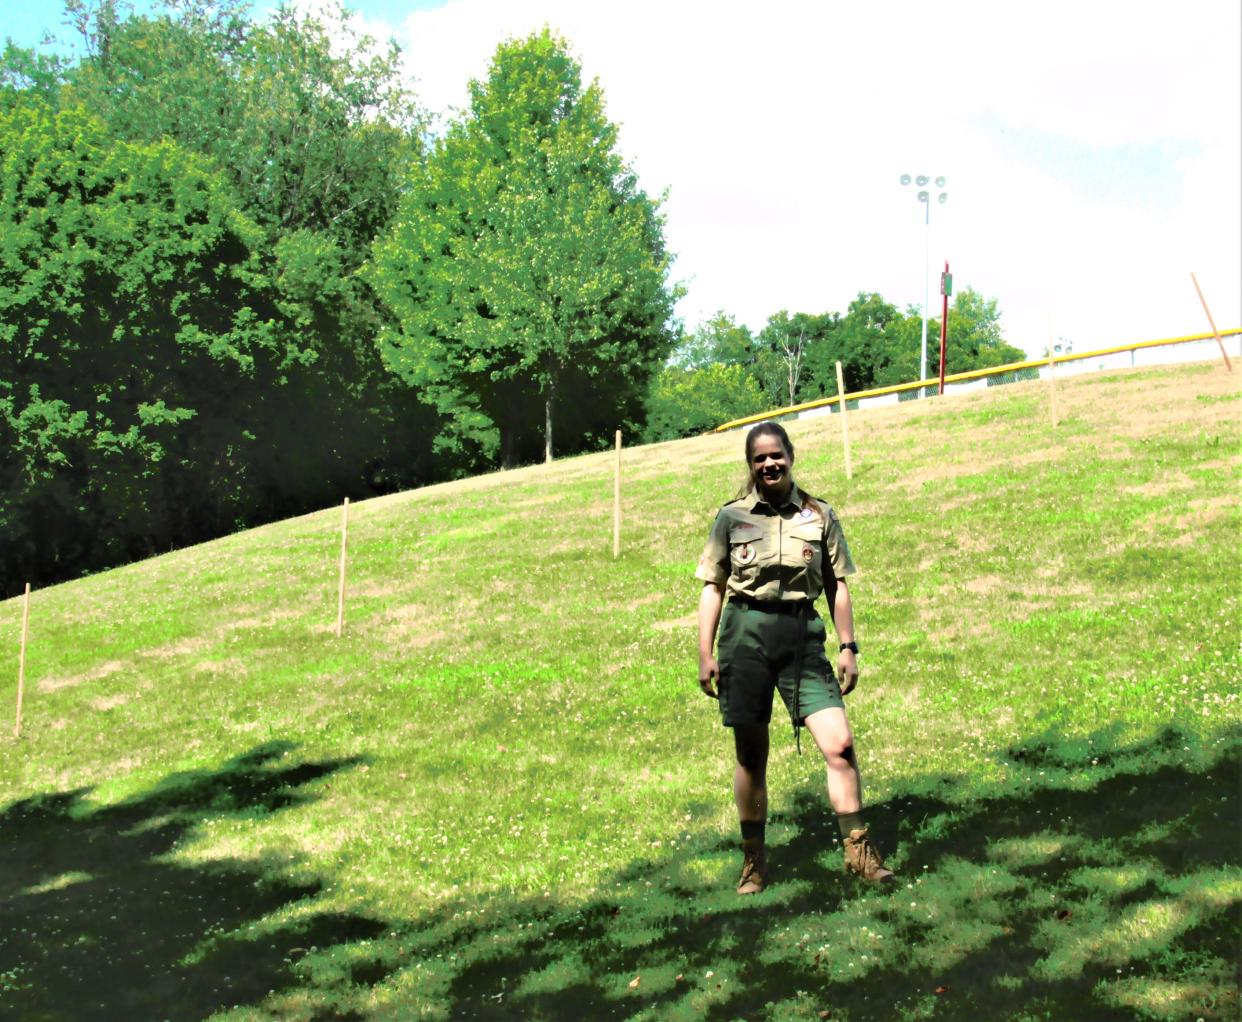 Brenna Barbey stands on the hillside where her proposed Eagle Scout project of an amphitheater has been marked off. The location is beyond the outfield fence of the Little League field at Deer Run Park.